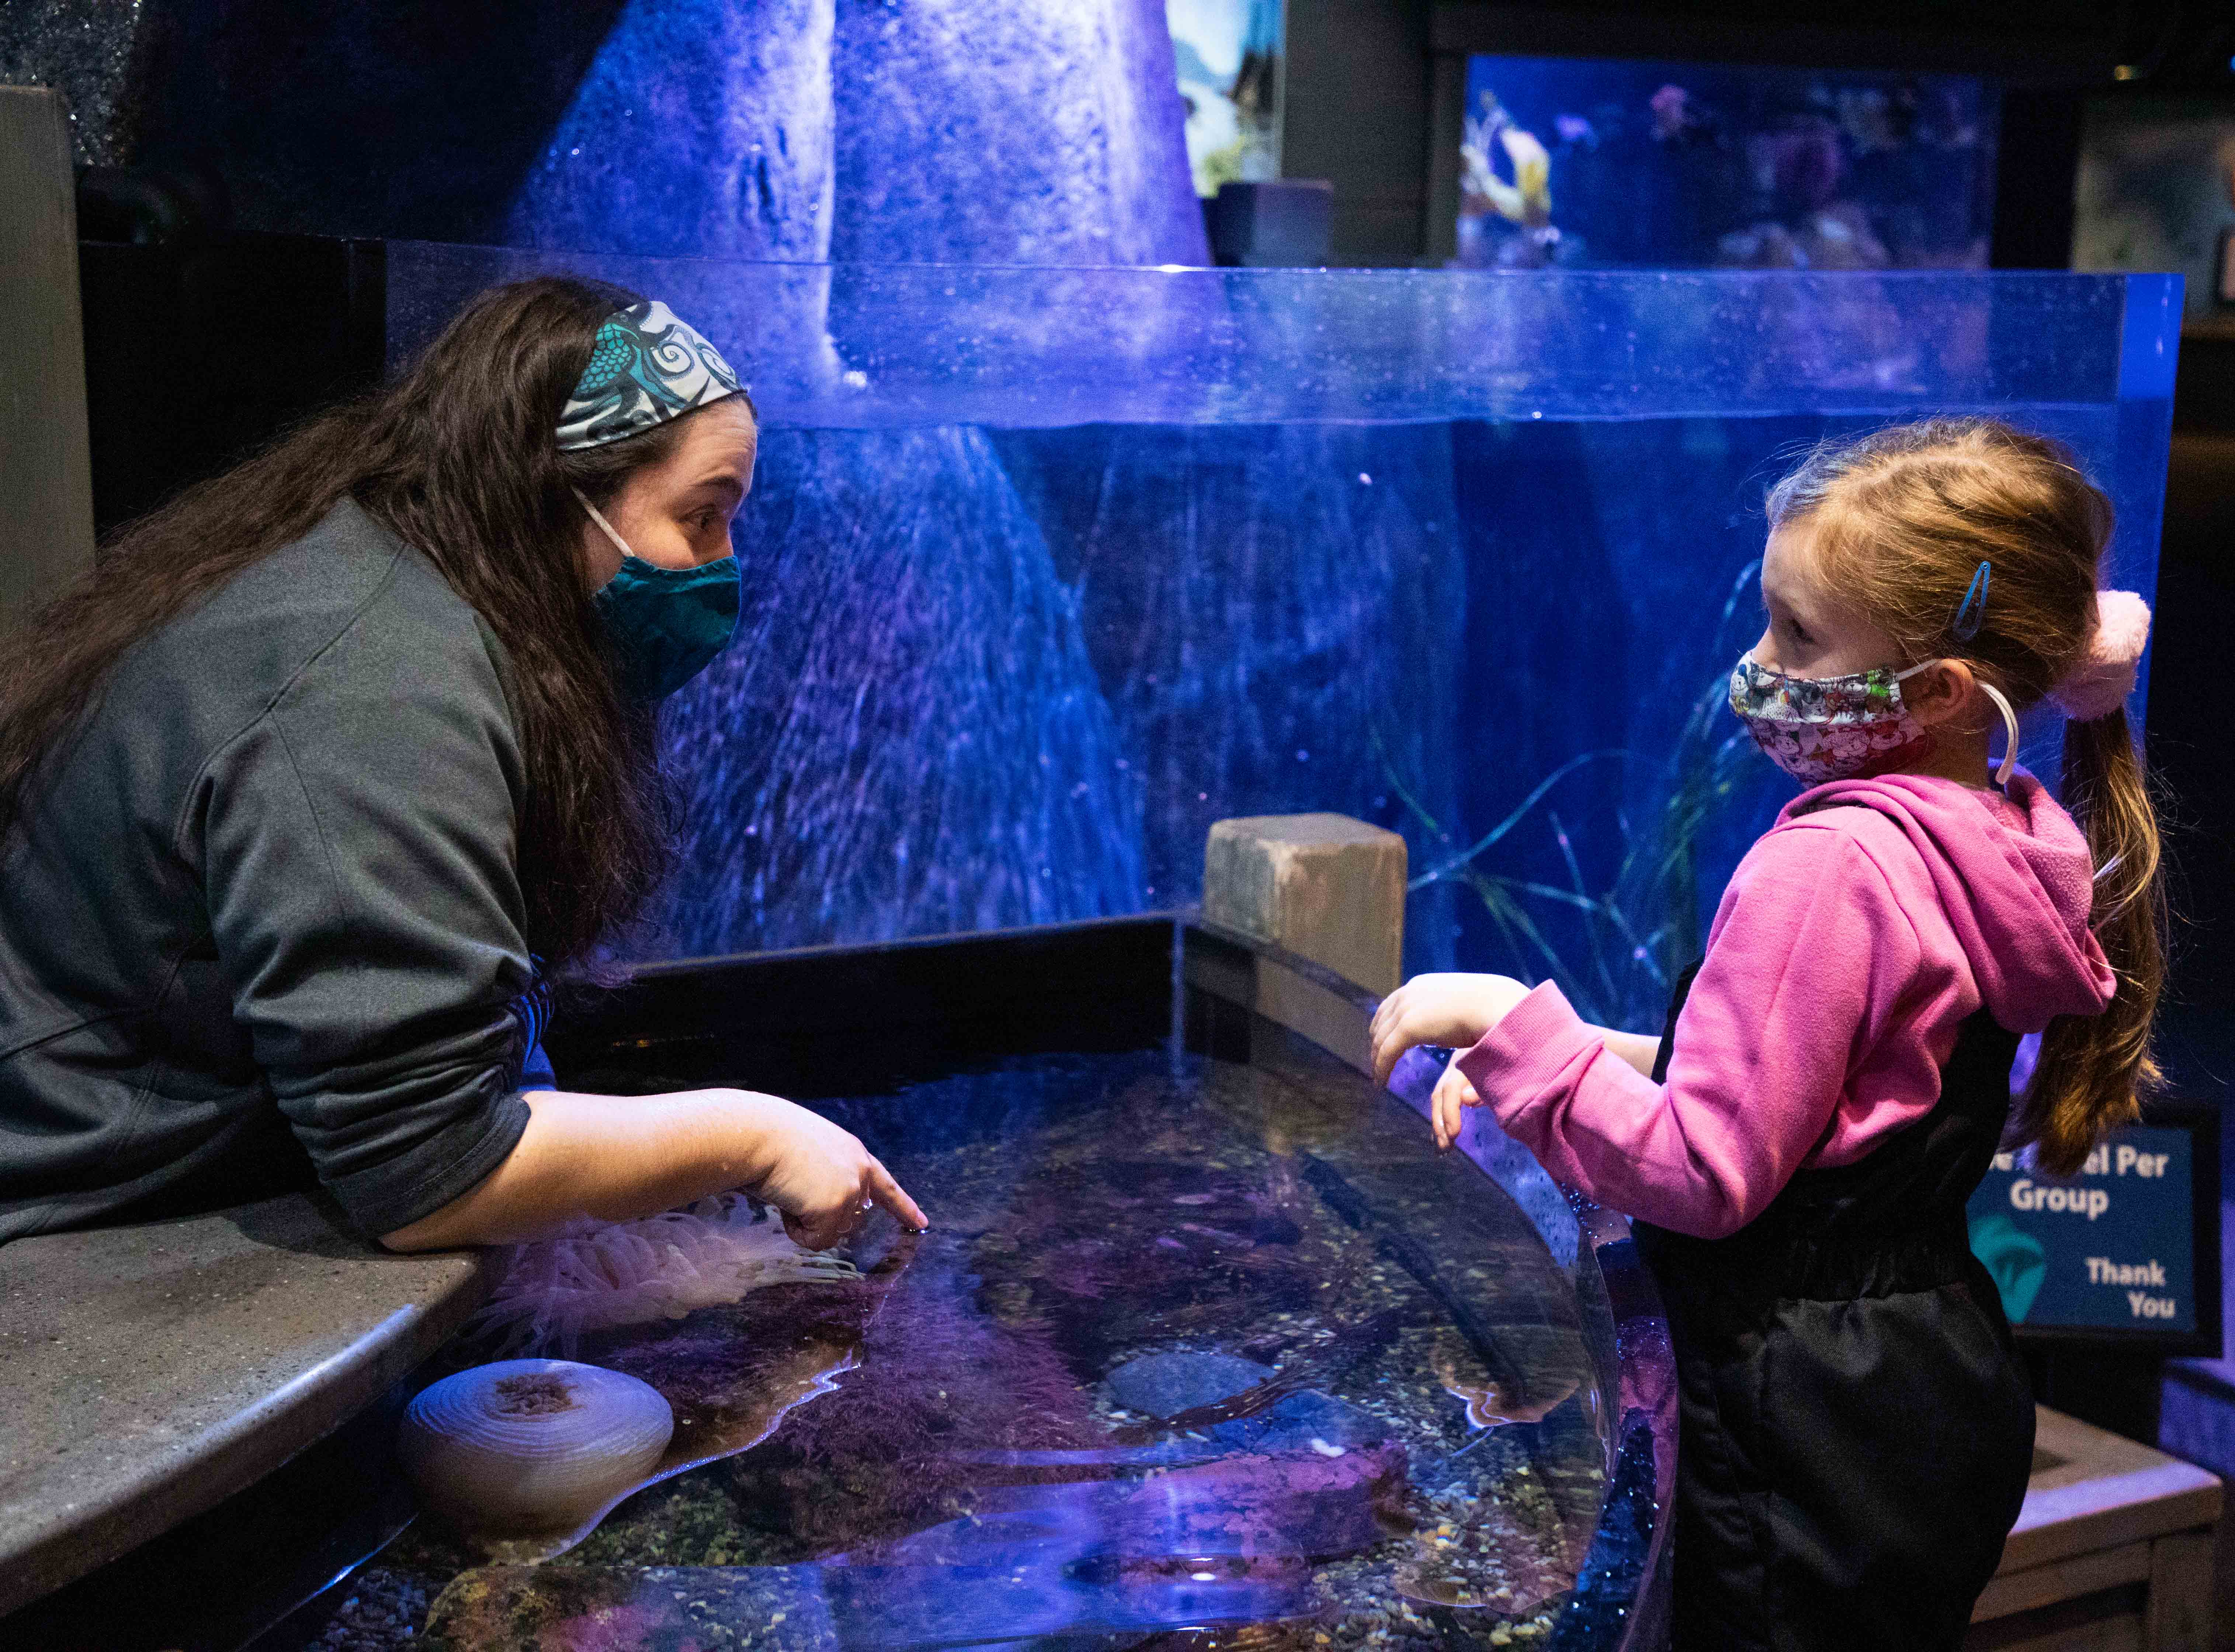 An education specialist shows a young girl intertidal species in the Discovery Touch pools at the Alaska SeaLife Center.